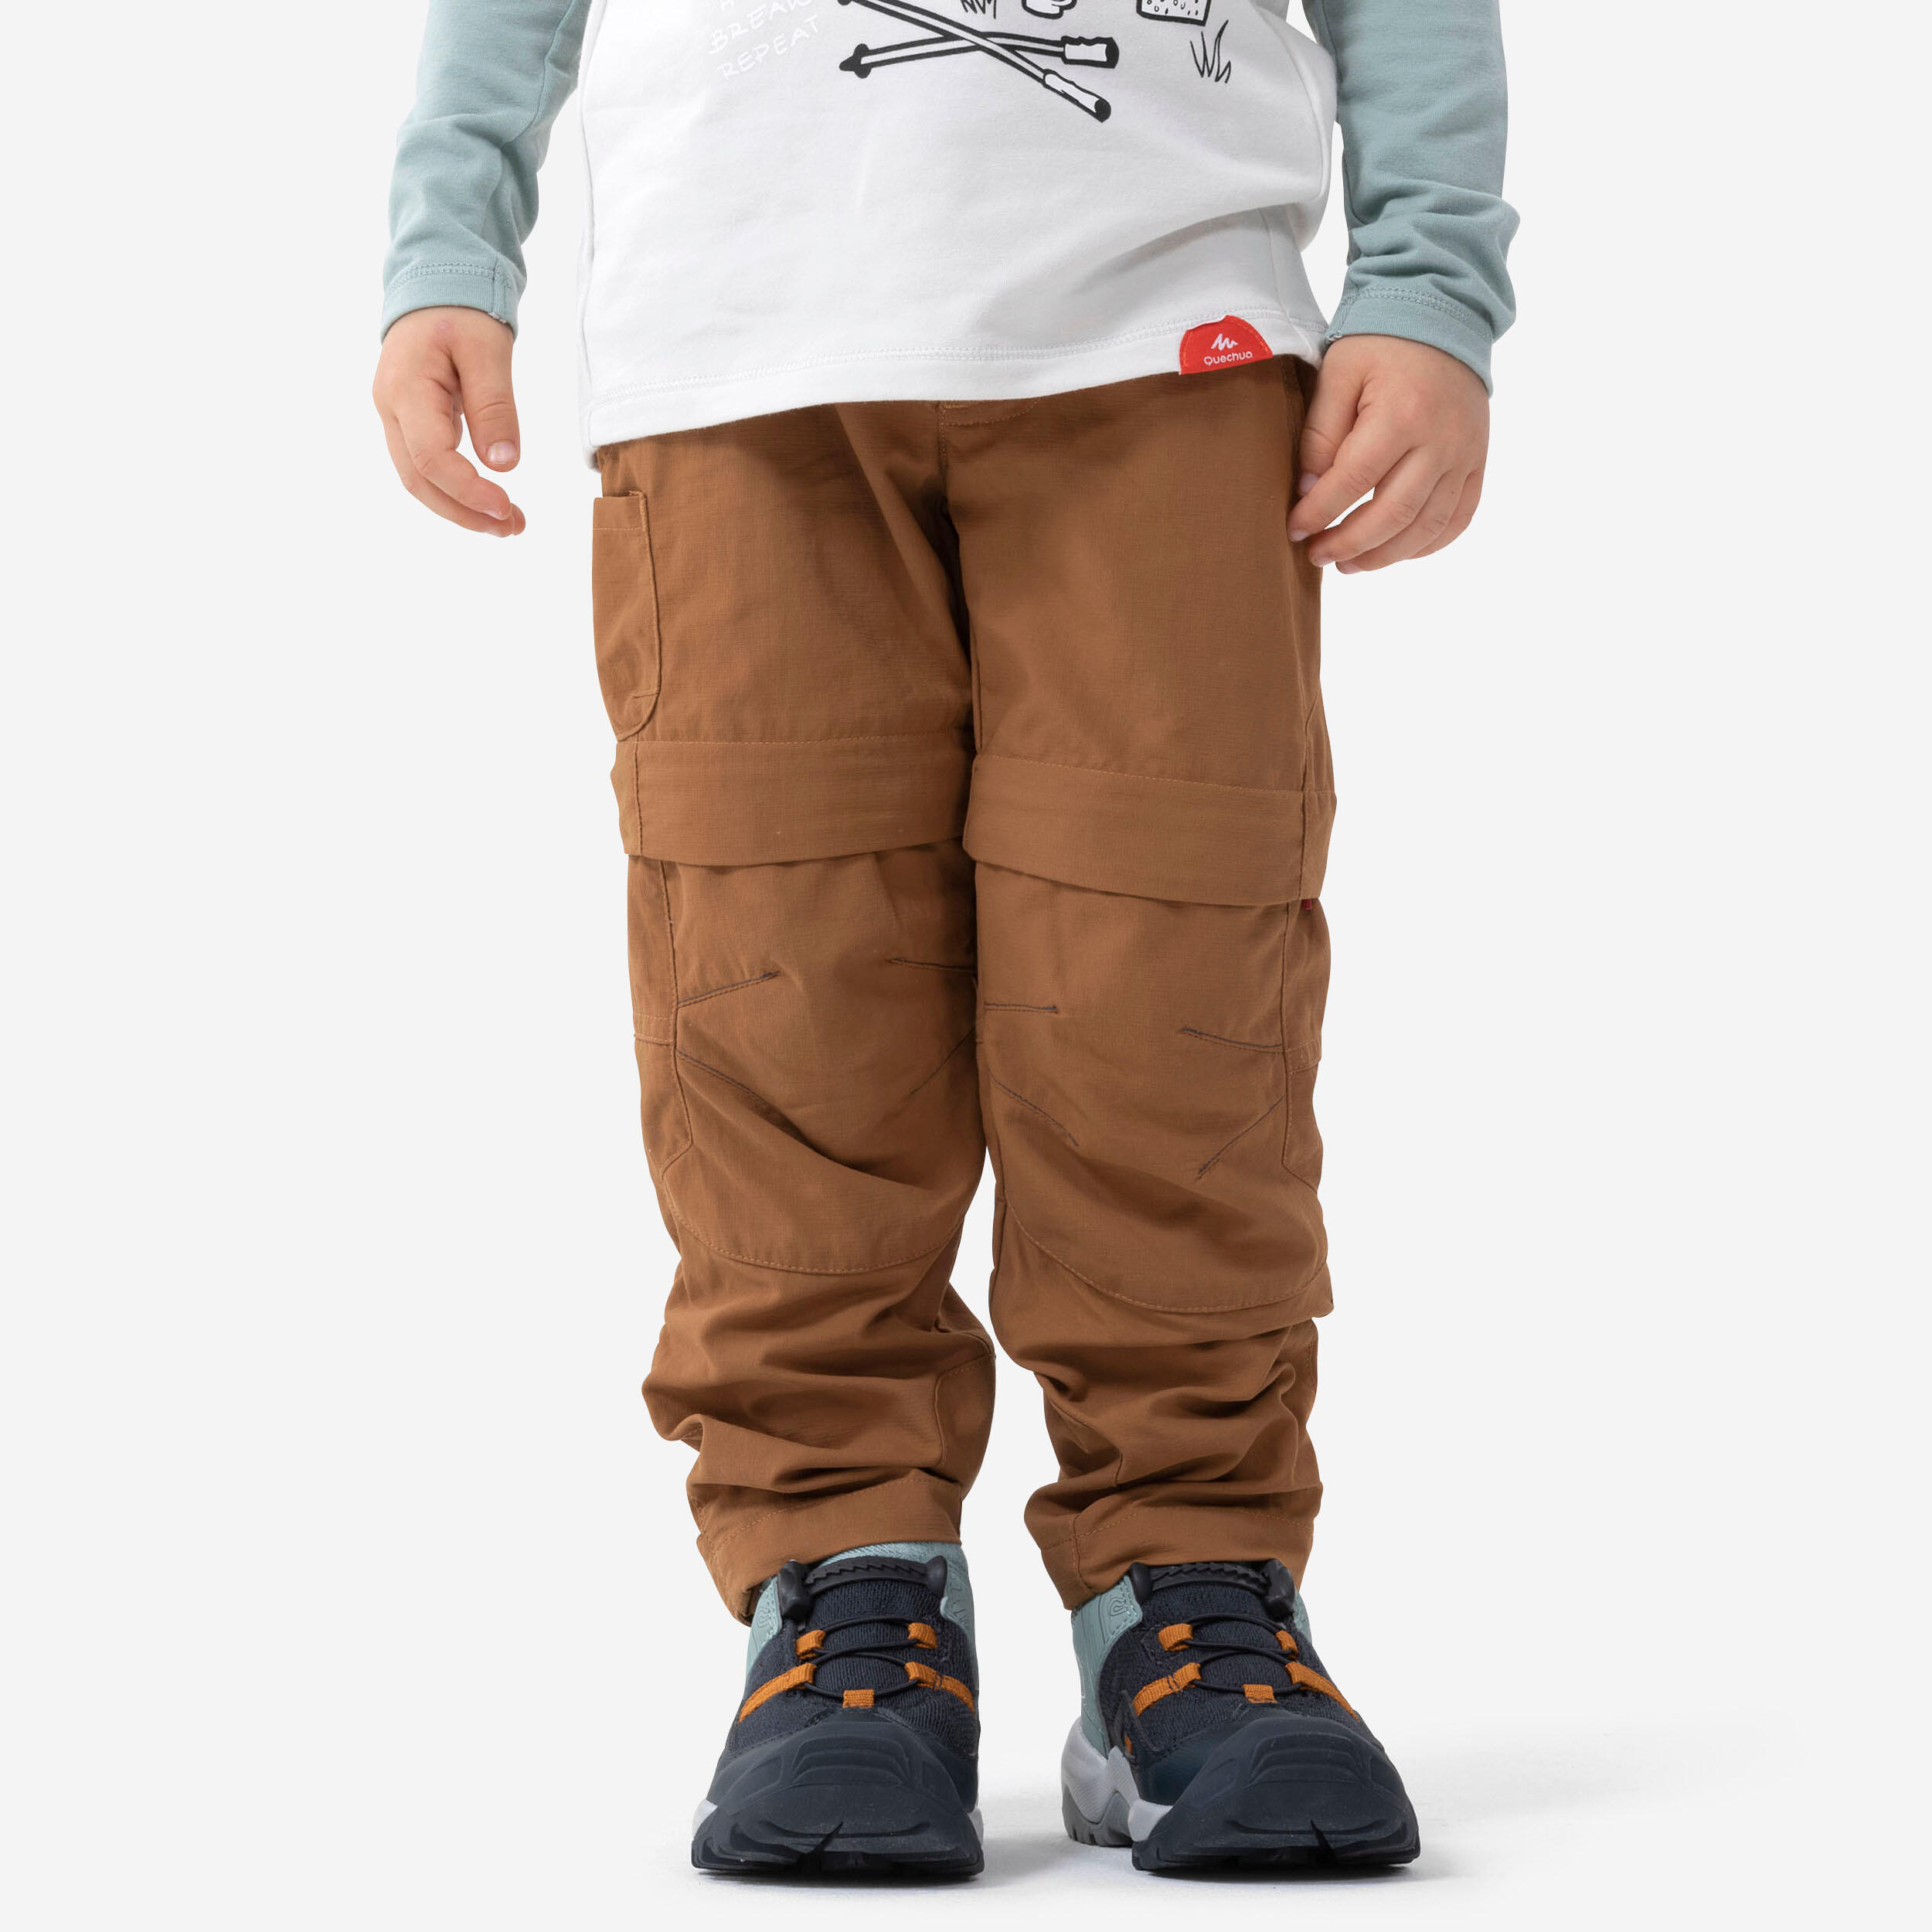 QUECHUA Kids' Hiking Zip-Off Trousers MH500 2-6 Years